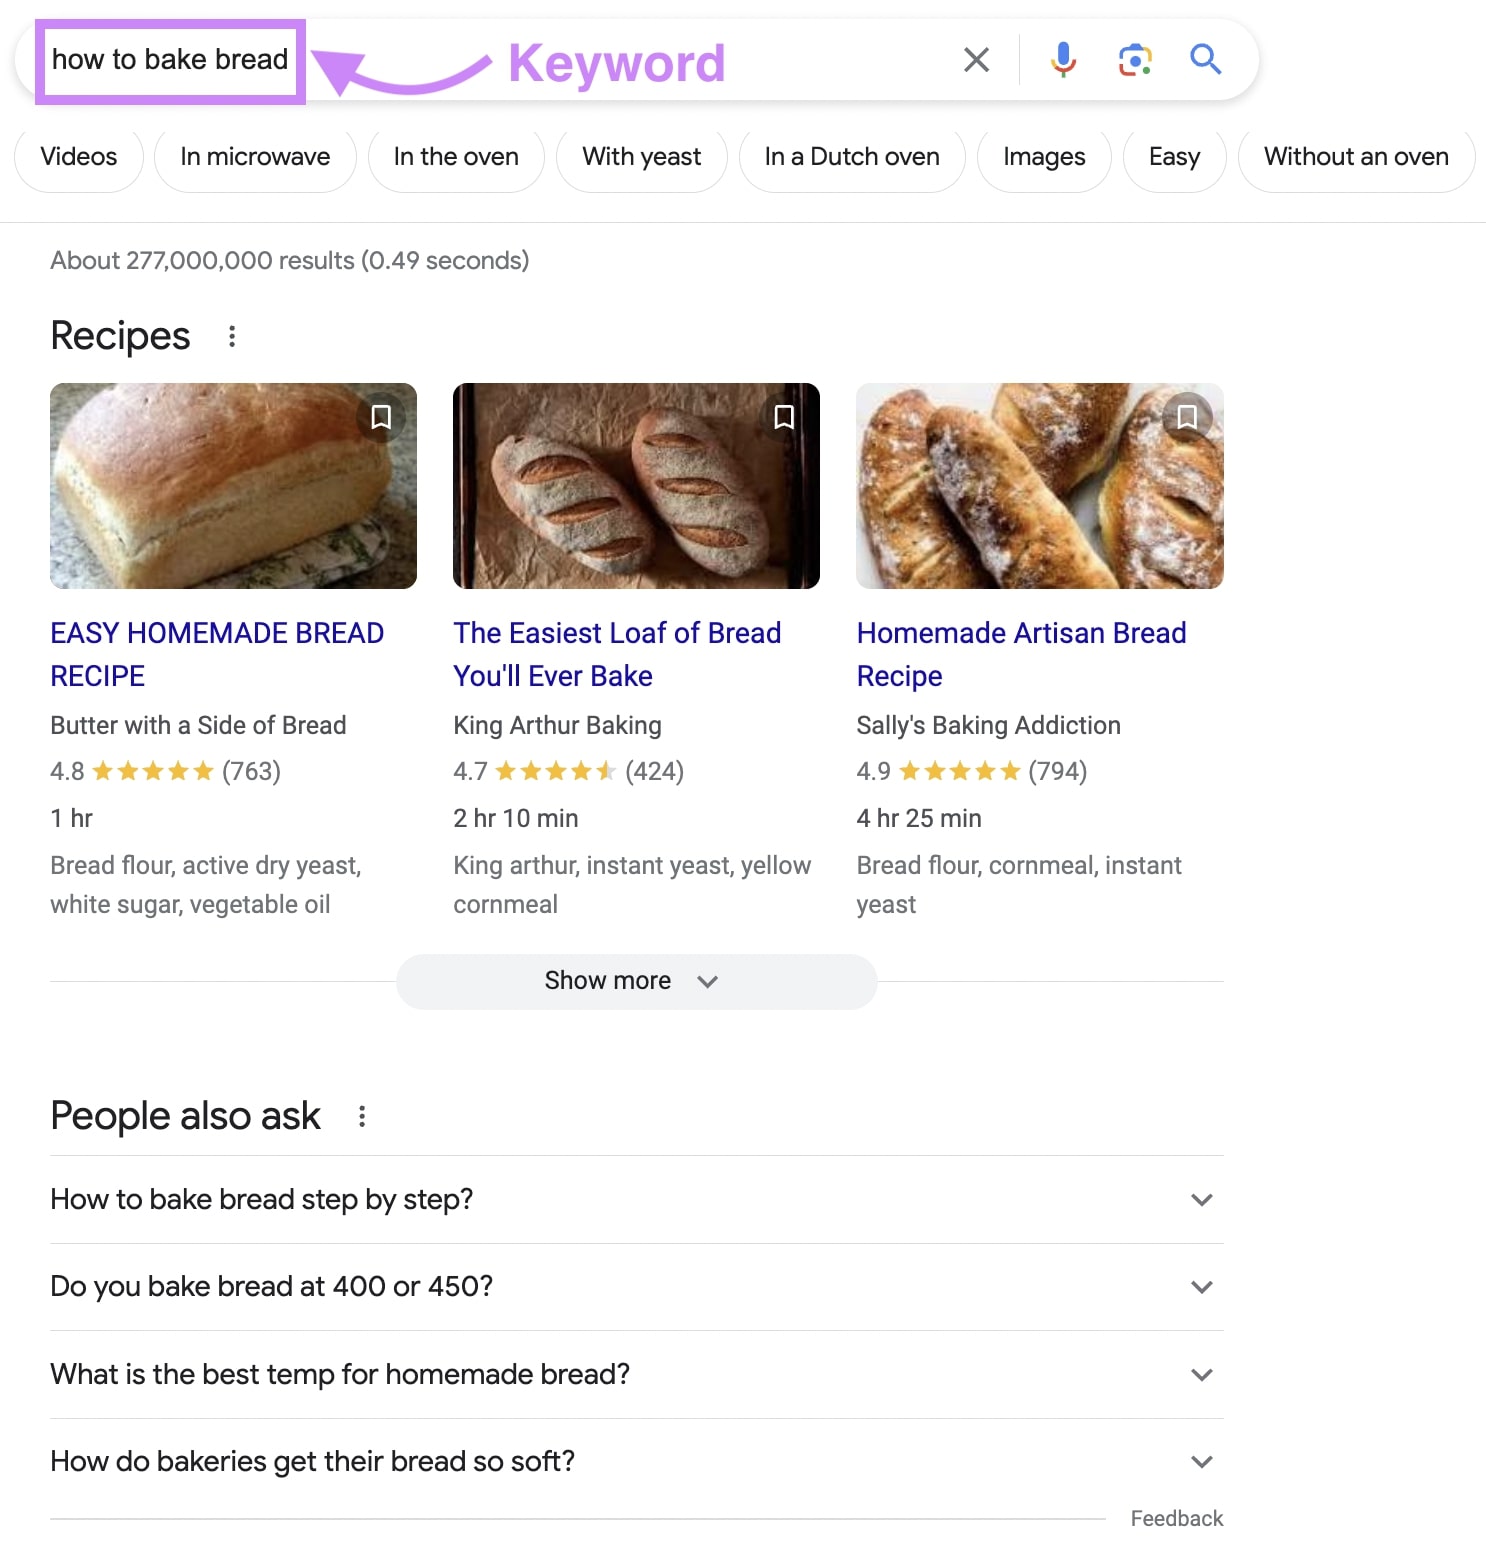 Google's SERP for ”how to bake bread” query